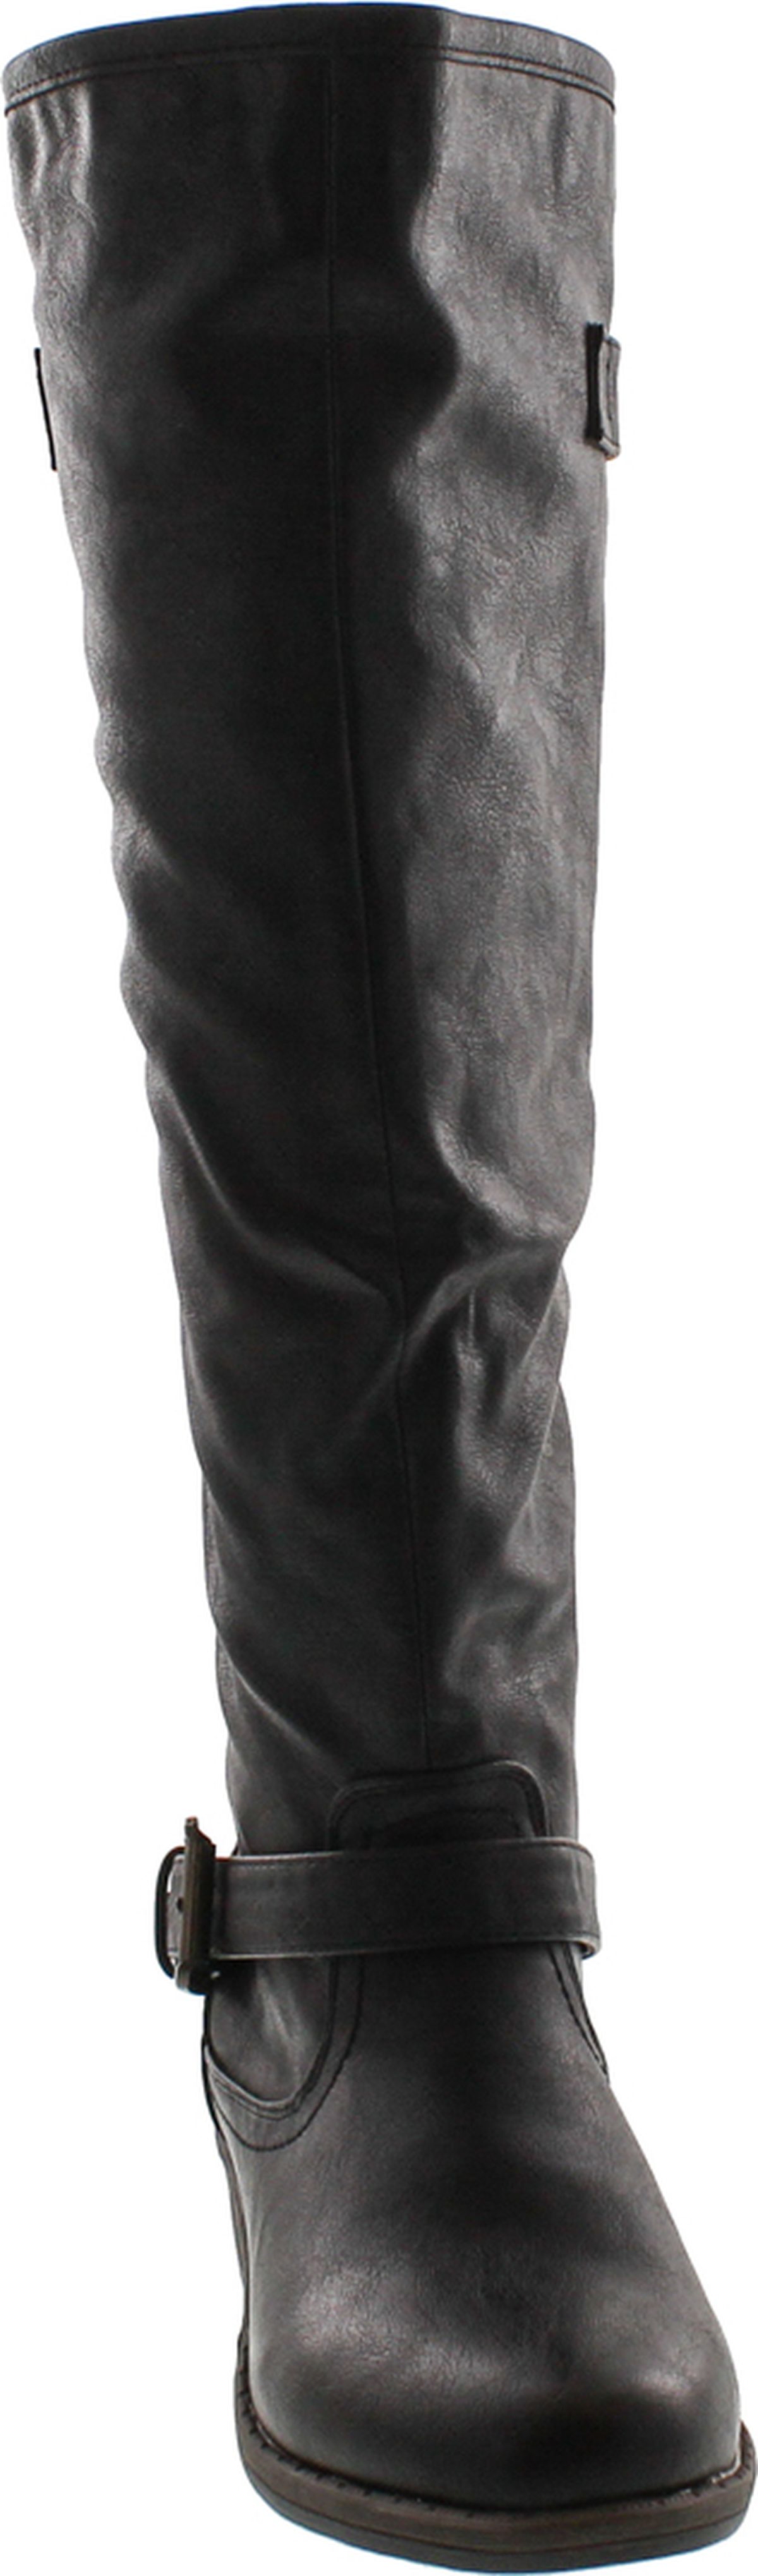 Bamboo Women's Montage 83 Riding Boots with Zipper, Black, 6 - image 4 of 4